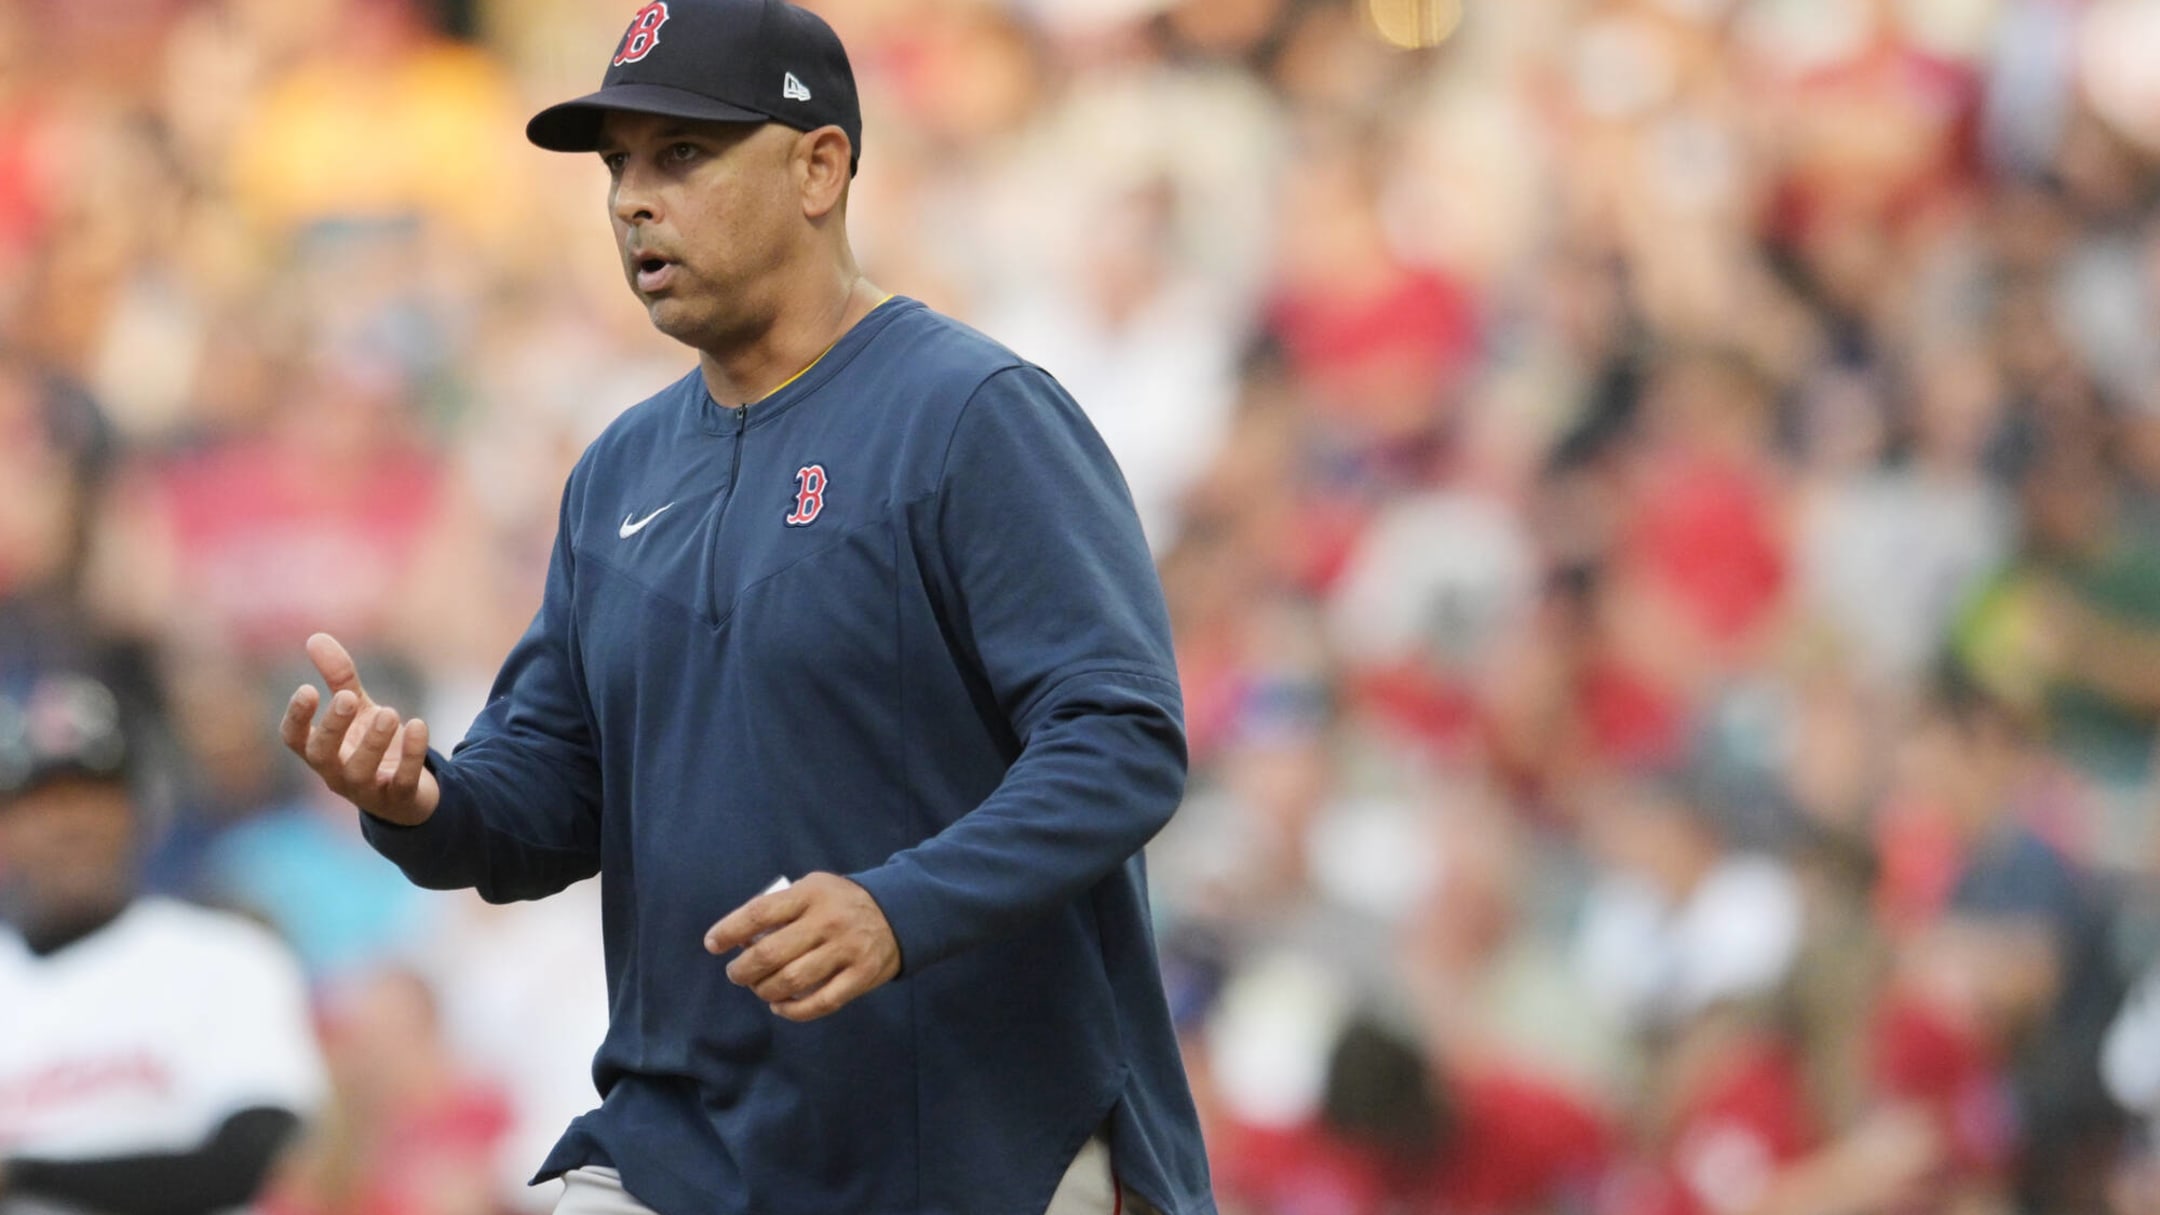 Alex Cora bragged about Astros' sign-stealing to Red Sox